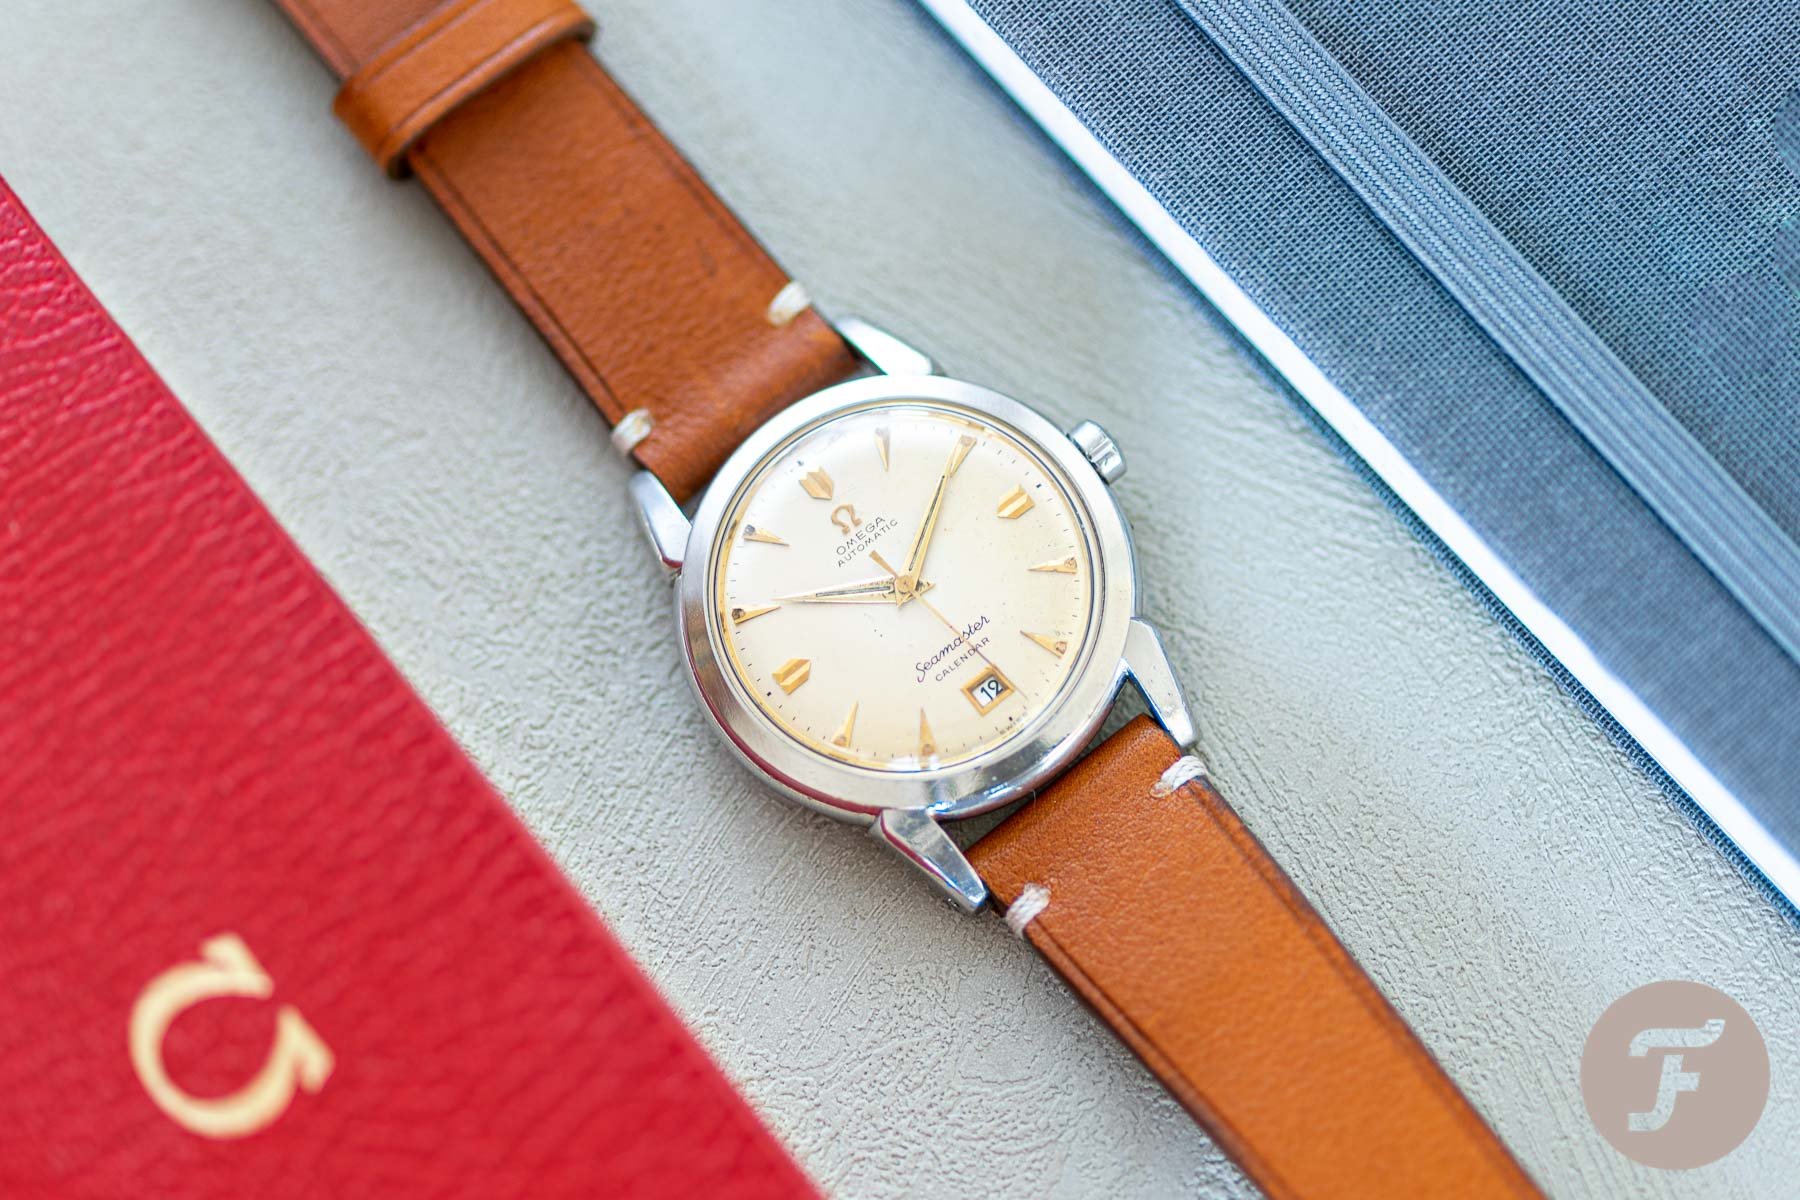 Buying Guide: The Best Omega Watches From The 1950s